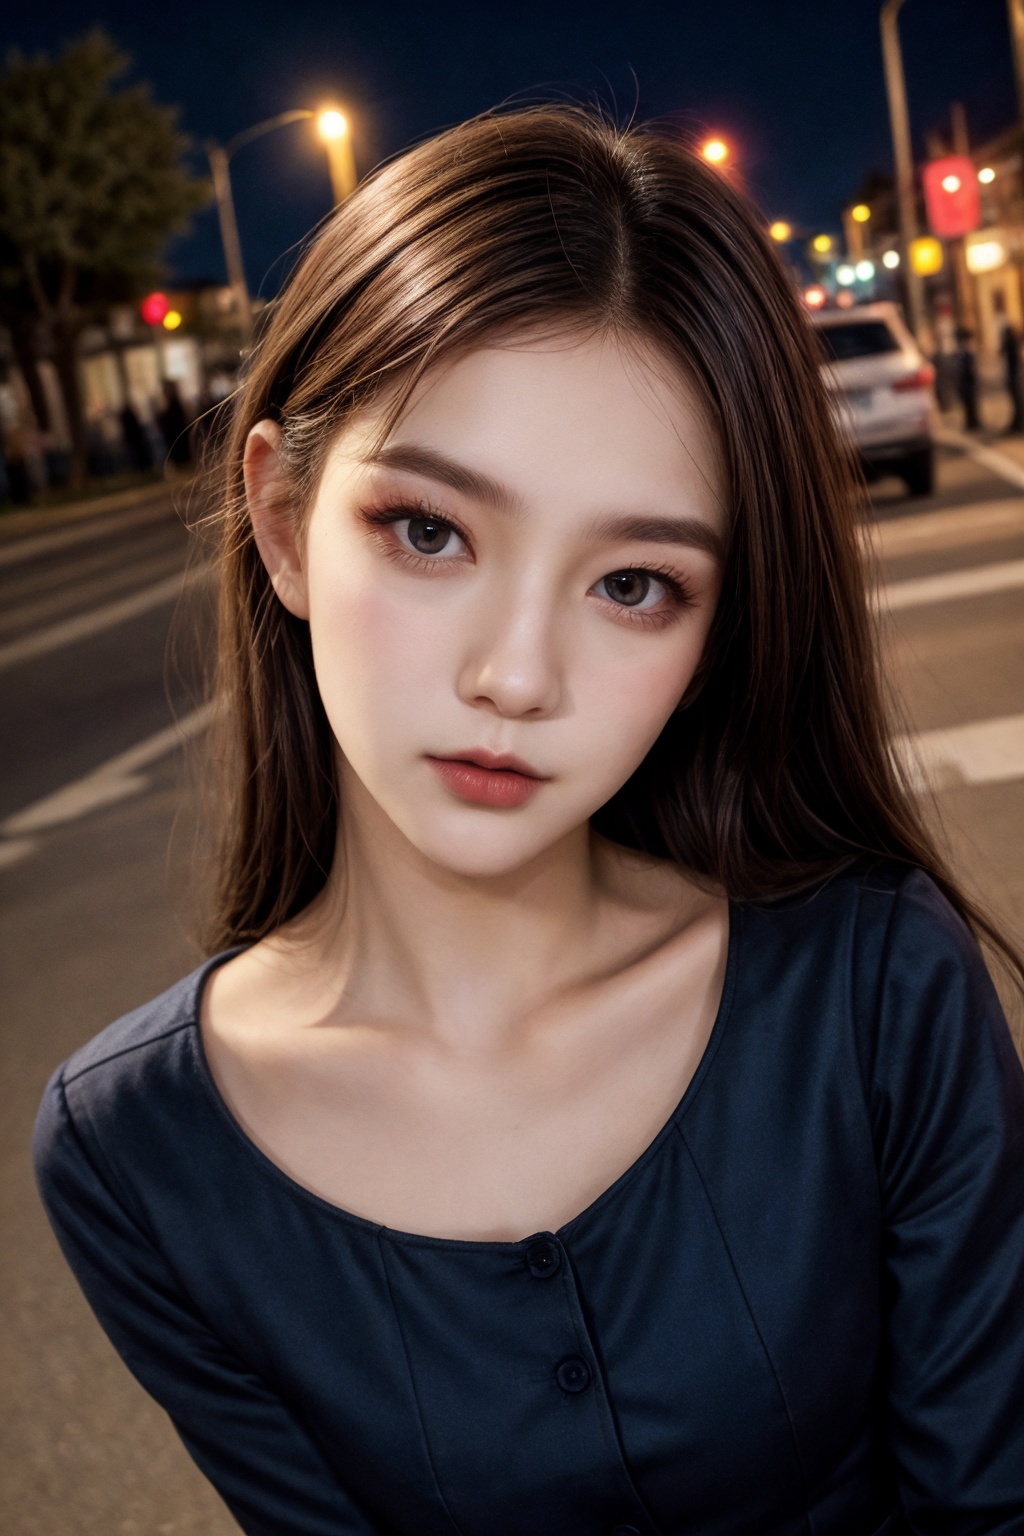 instagram photo, closeup face photo of 18 y.o woman in dress, beautiful face, makeup, night city street,shot from above